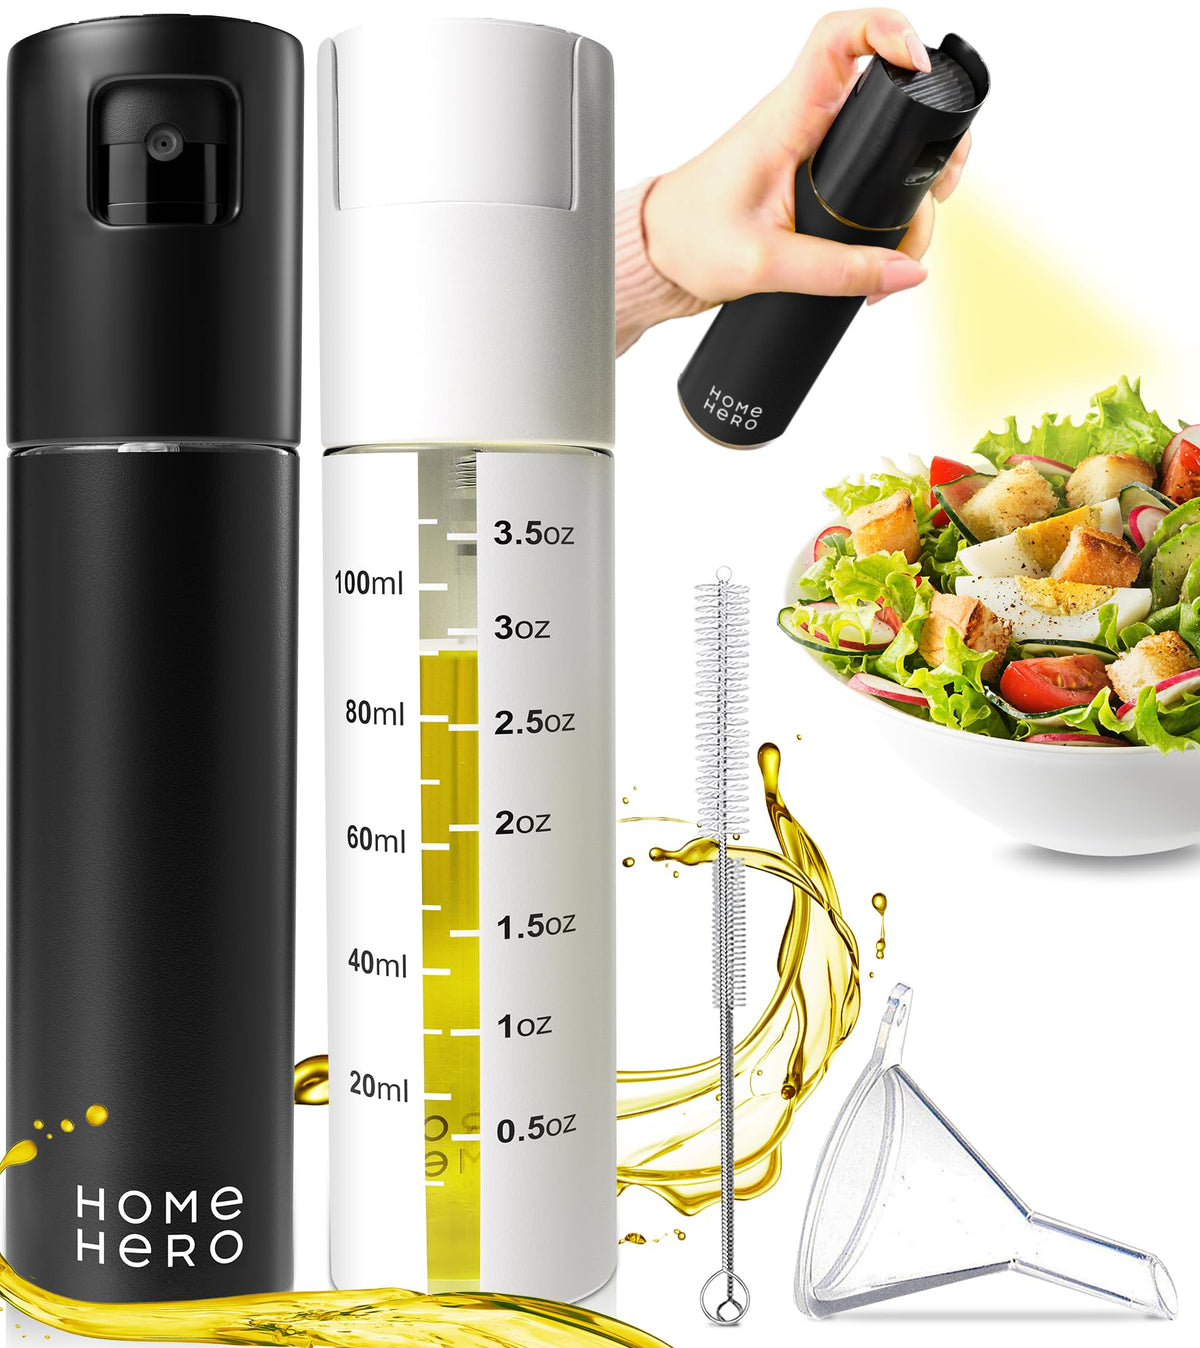 Home Hero 2 Pcs Oil Sprayer for Cooking - 120 ml Olive Oil Sprayer for Cooking - Olive Oil Spray Bottle for Cooking with Funnel & Cleaning Brush (Black & White Oil Spray)